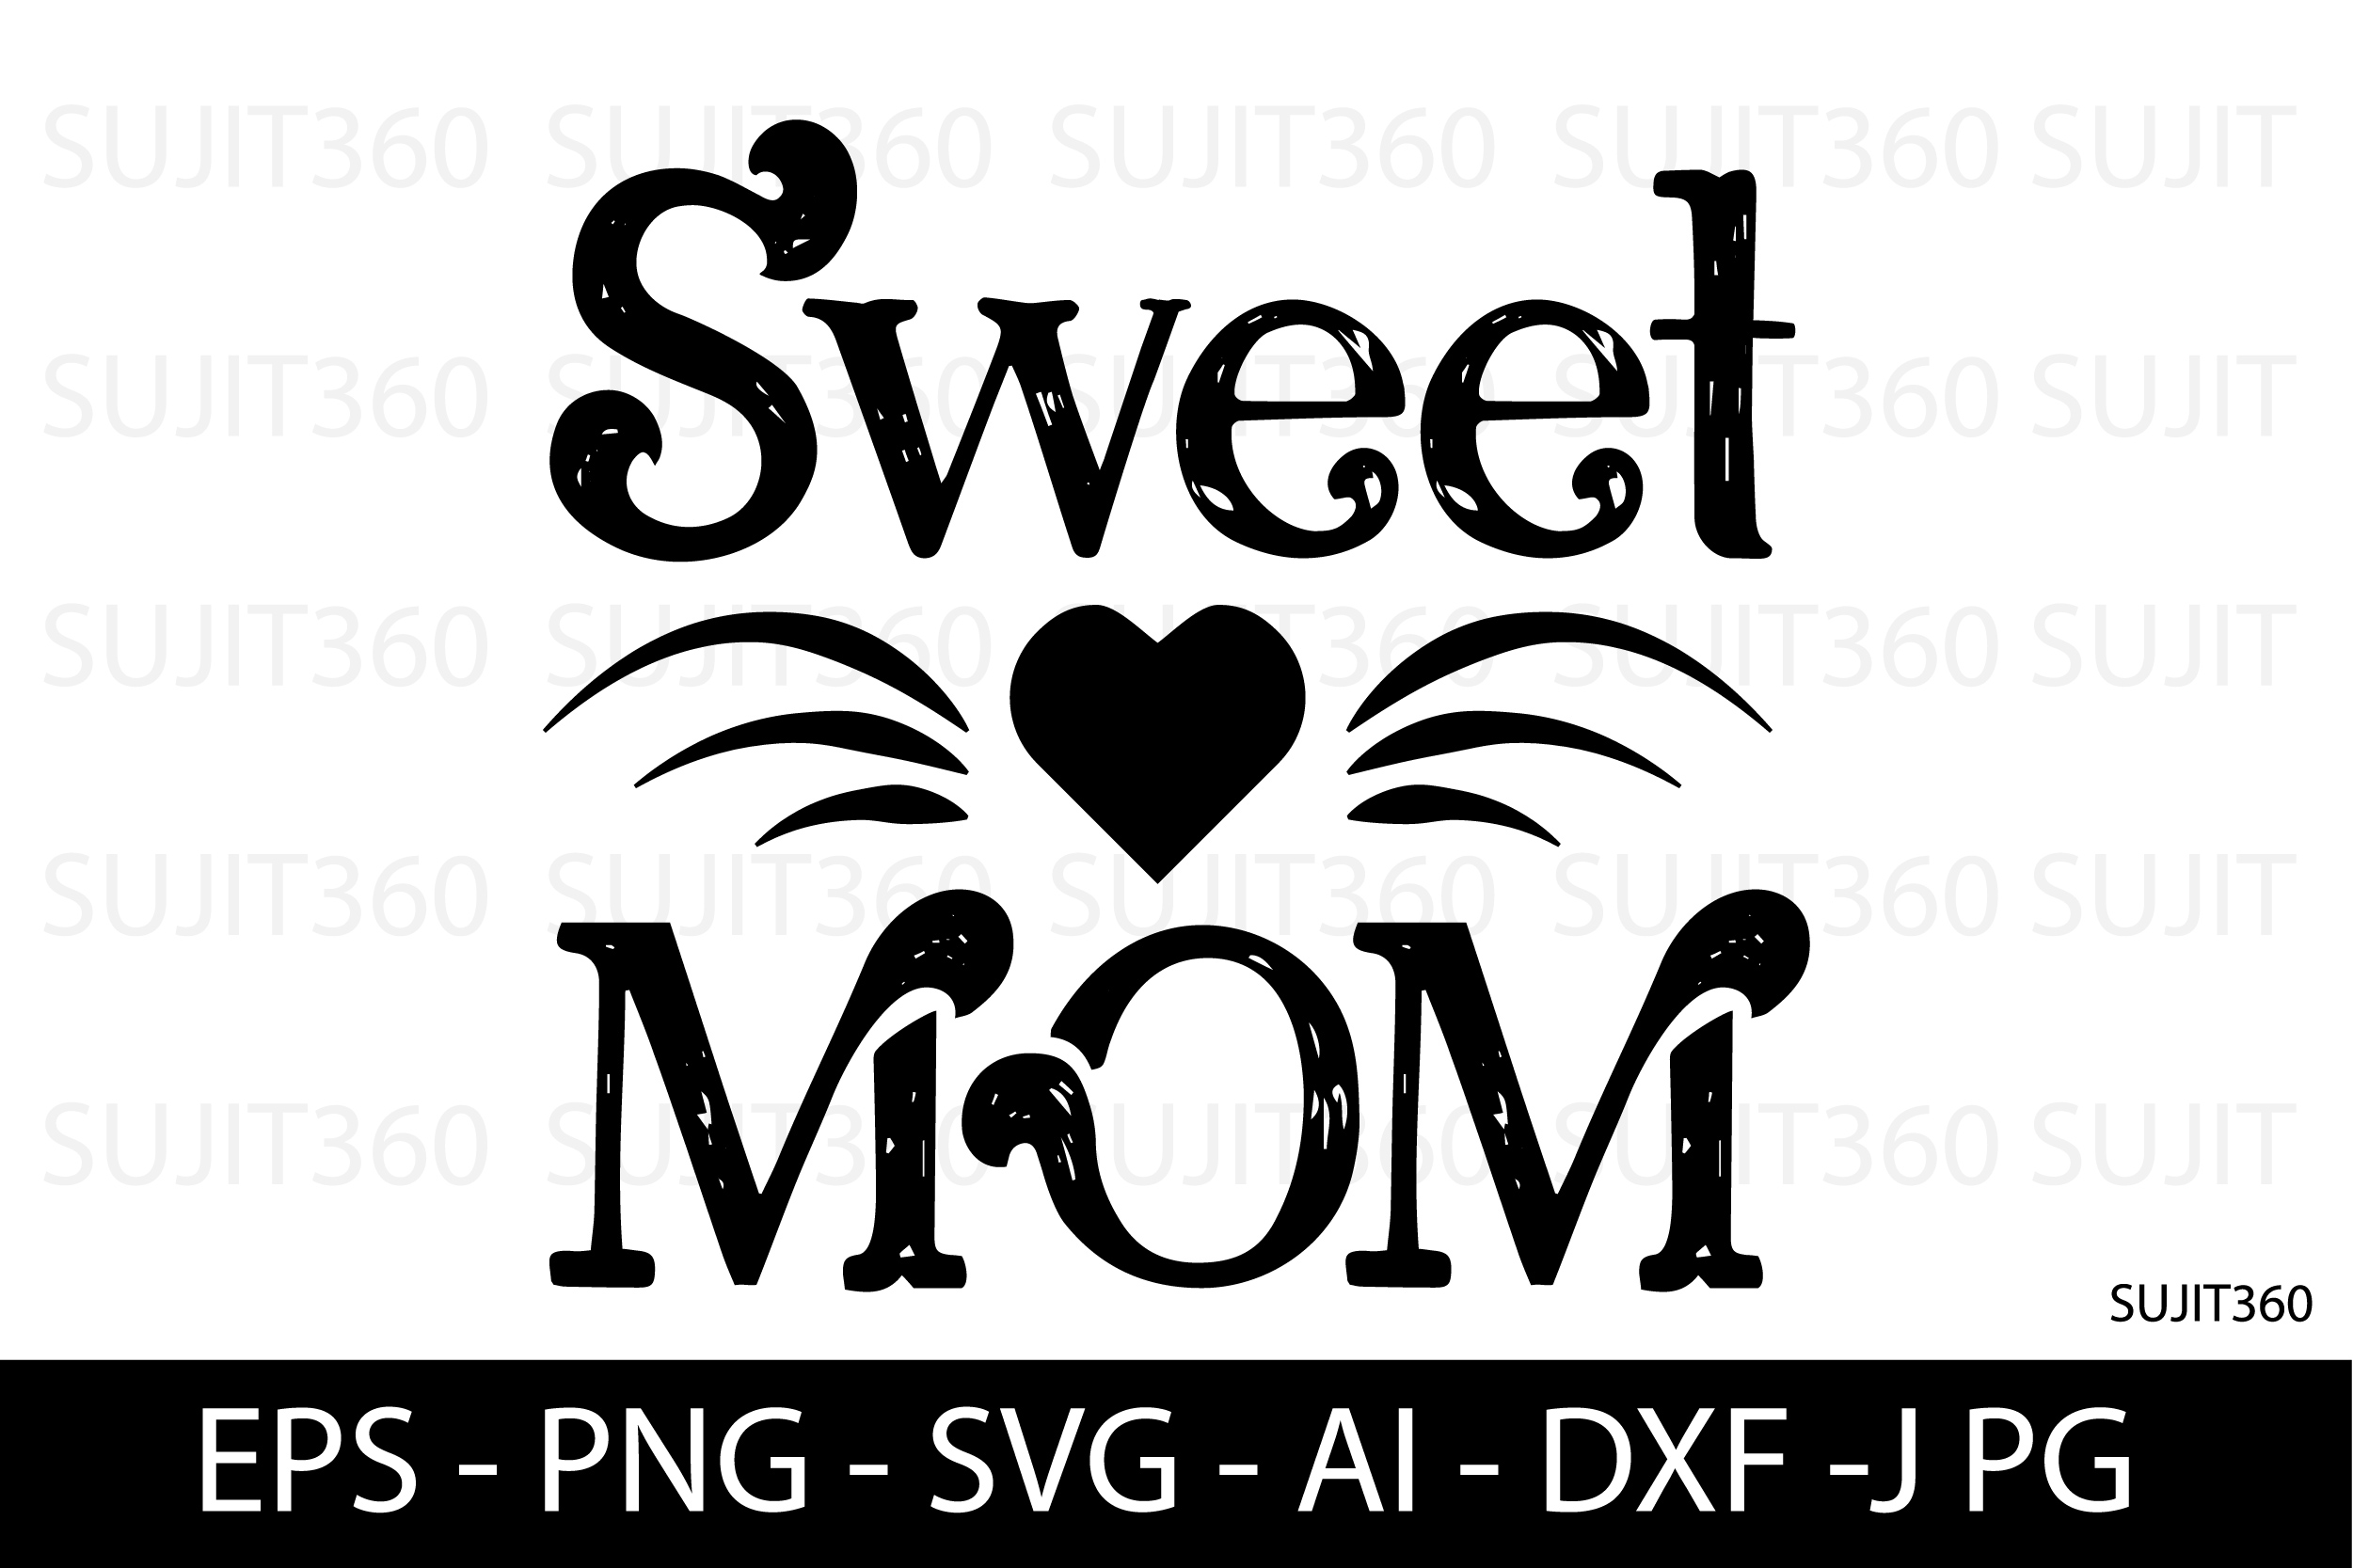 The font resembles a fountain with sweet words for mom.